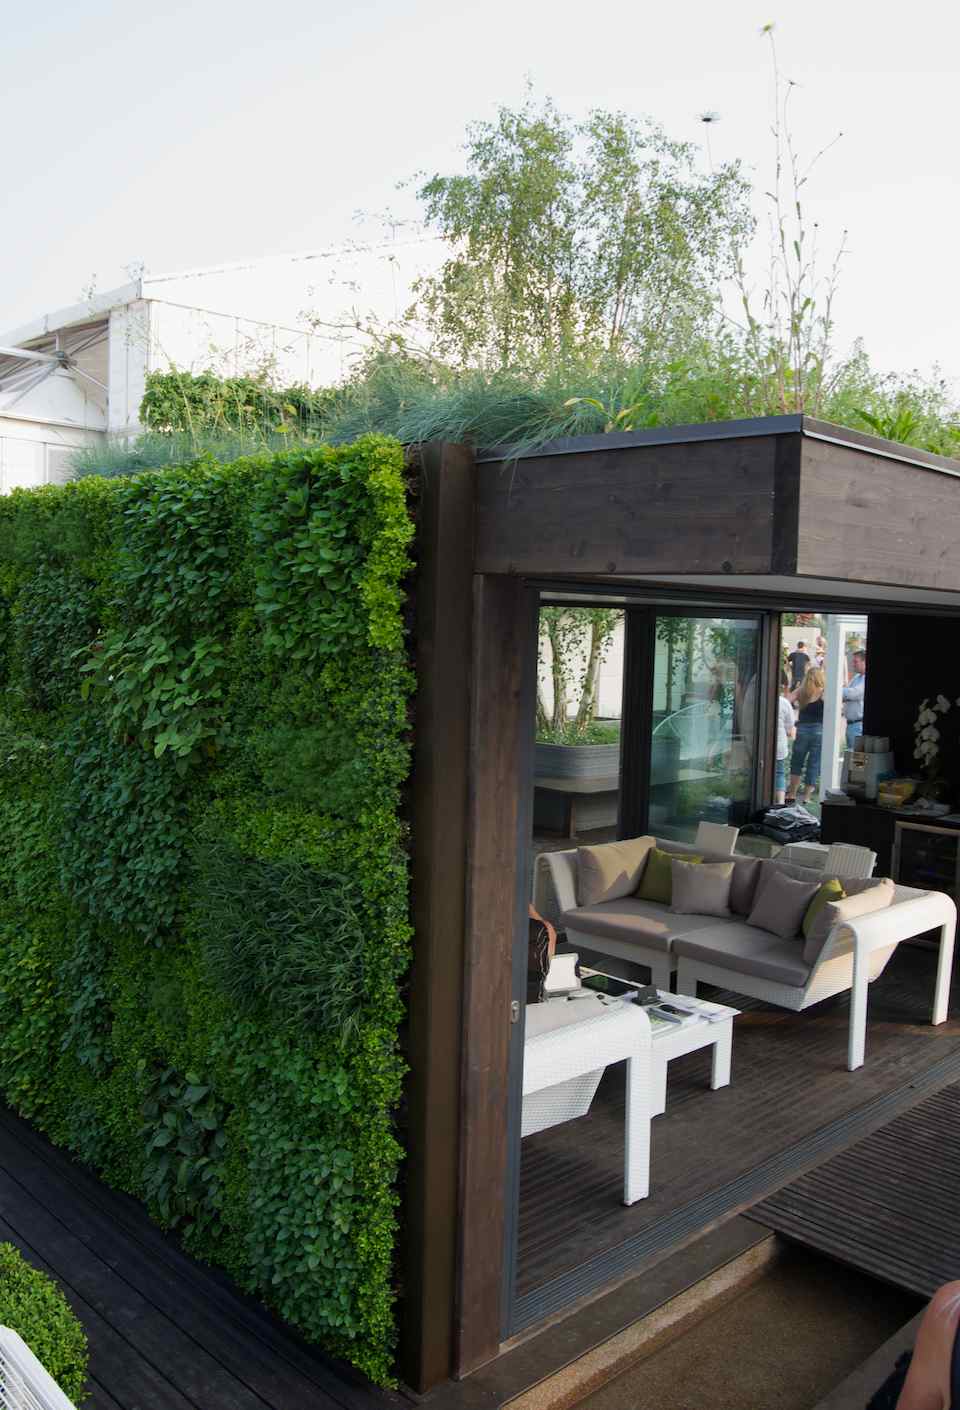 Photographer's Garden: Chelsea 2012: The Rooftop Workplace of Tomorrow